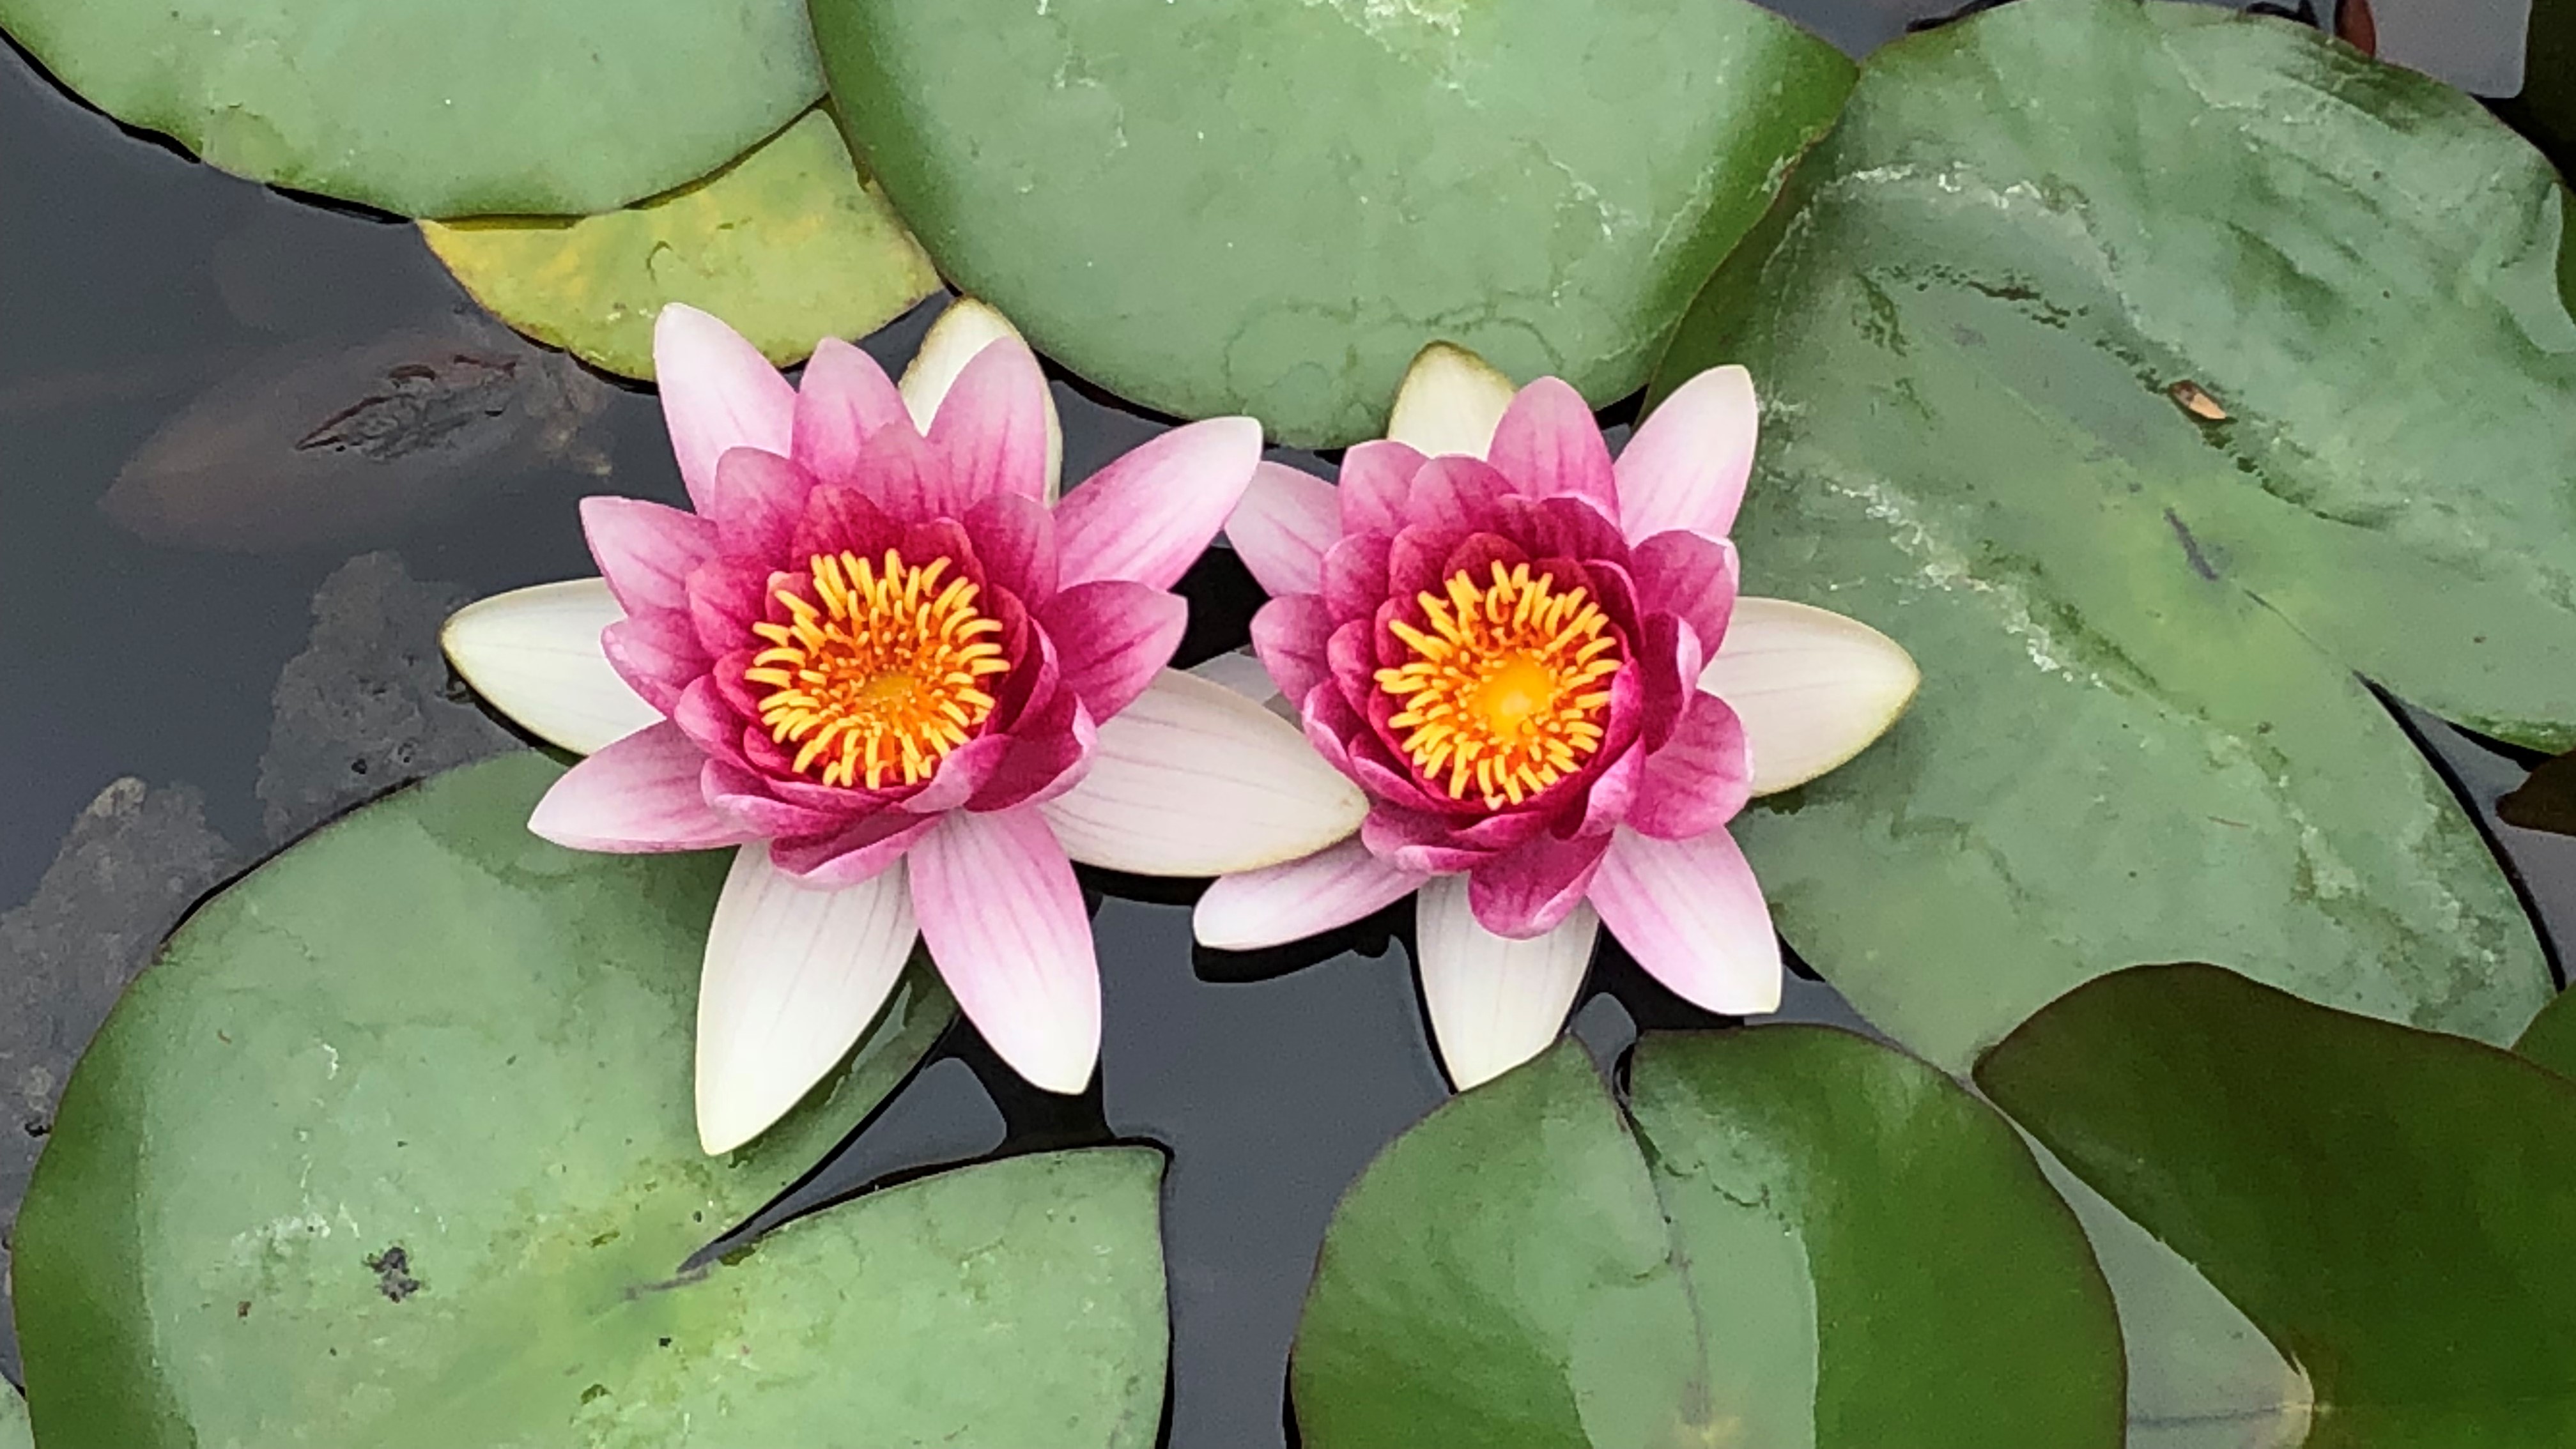 Two lotus flowers on a lilly pad in water.